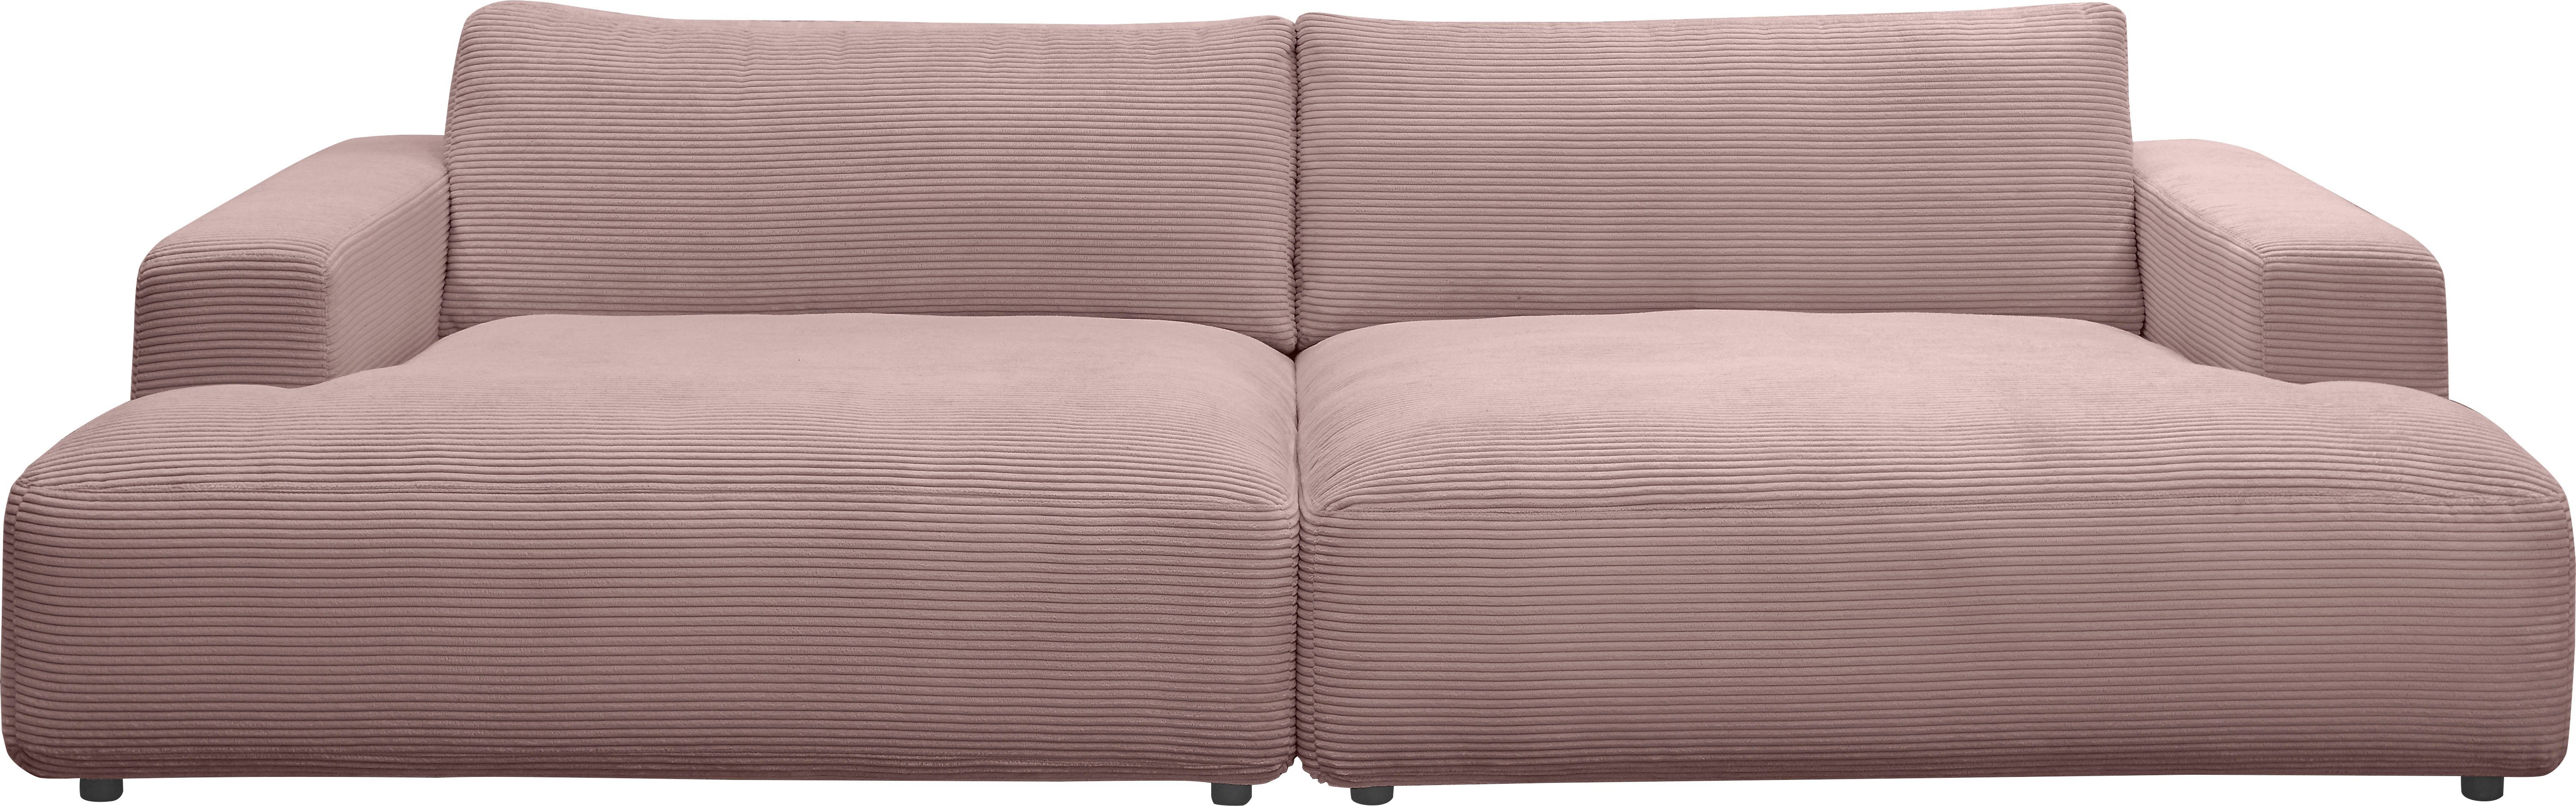 rosa 292 cm Loungesofa branded Lucia, M Breite Cord-Bezug, by Musterring GALLERY